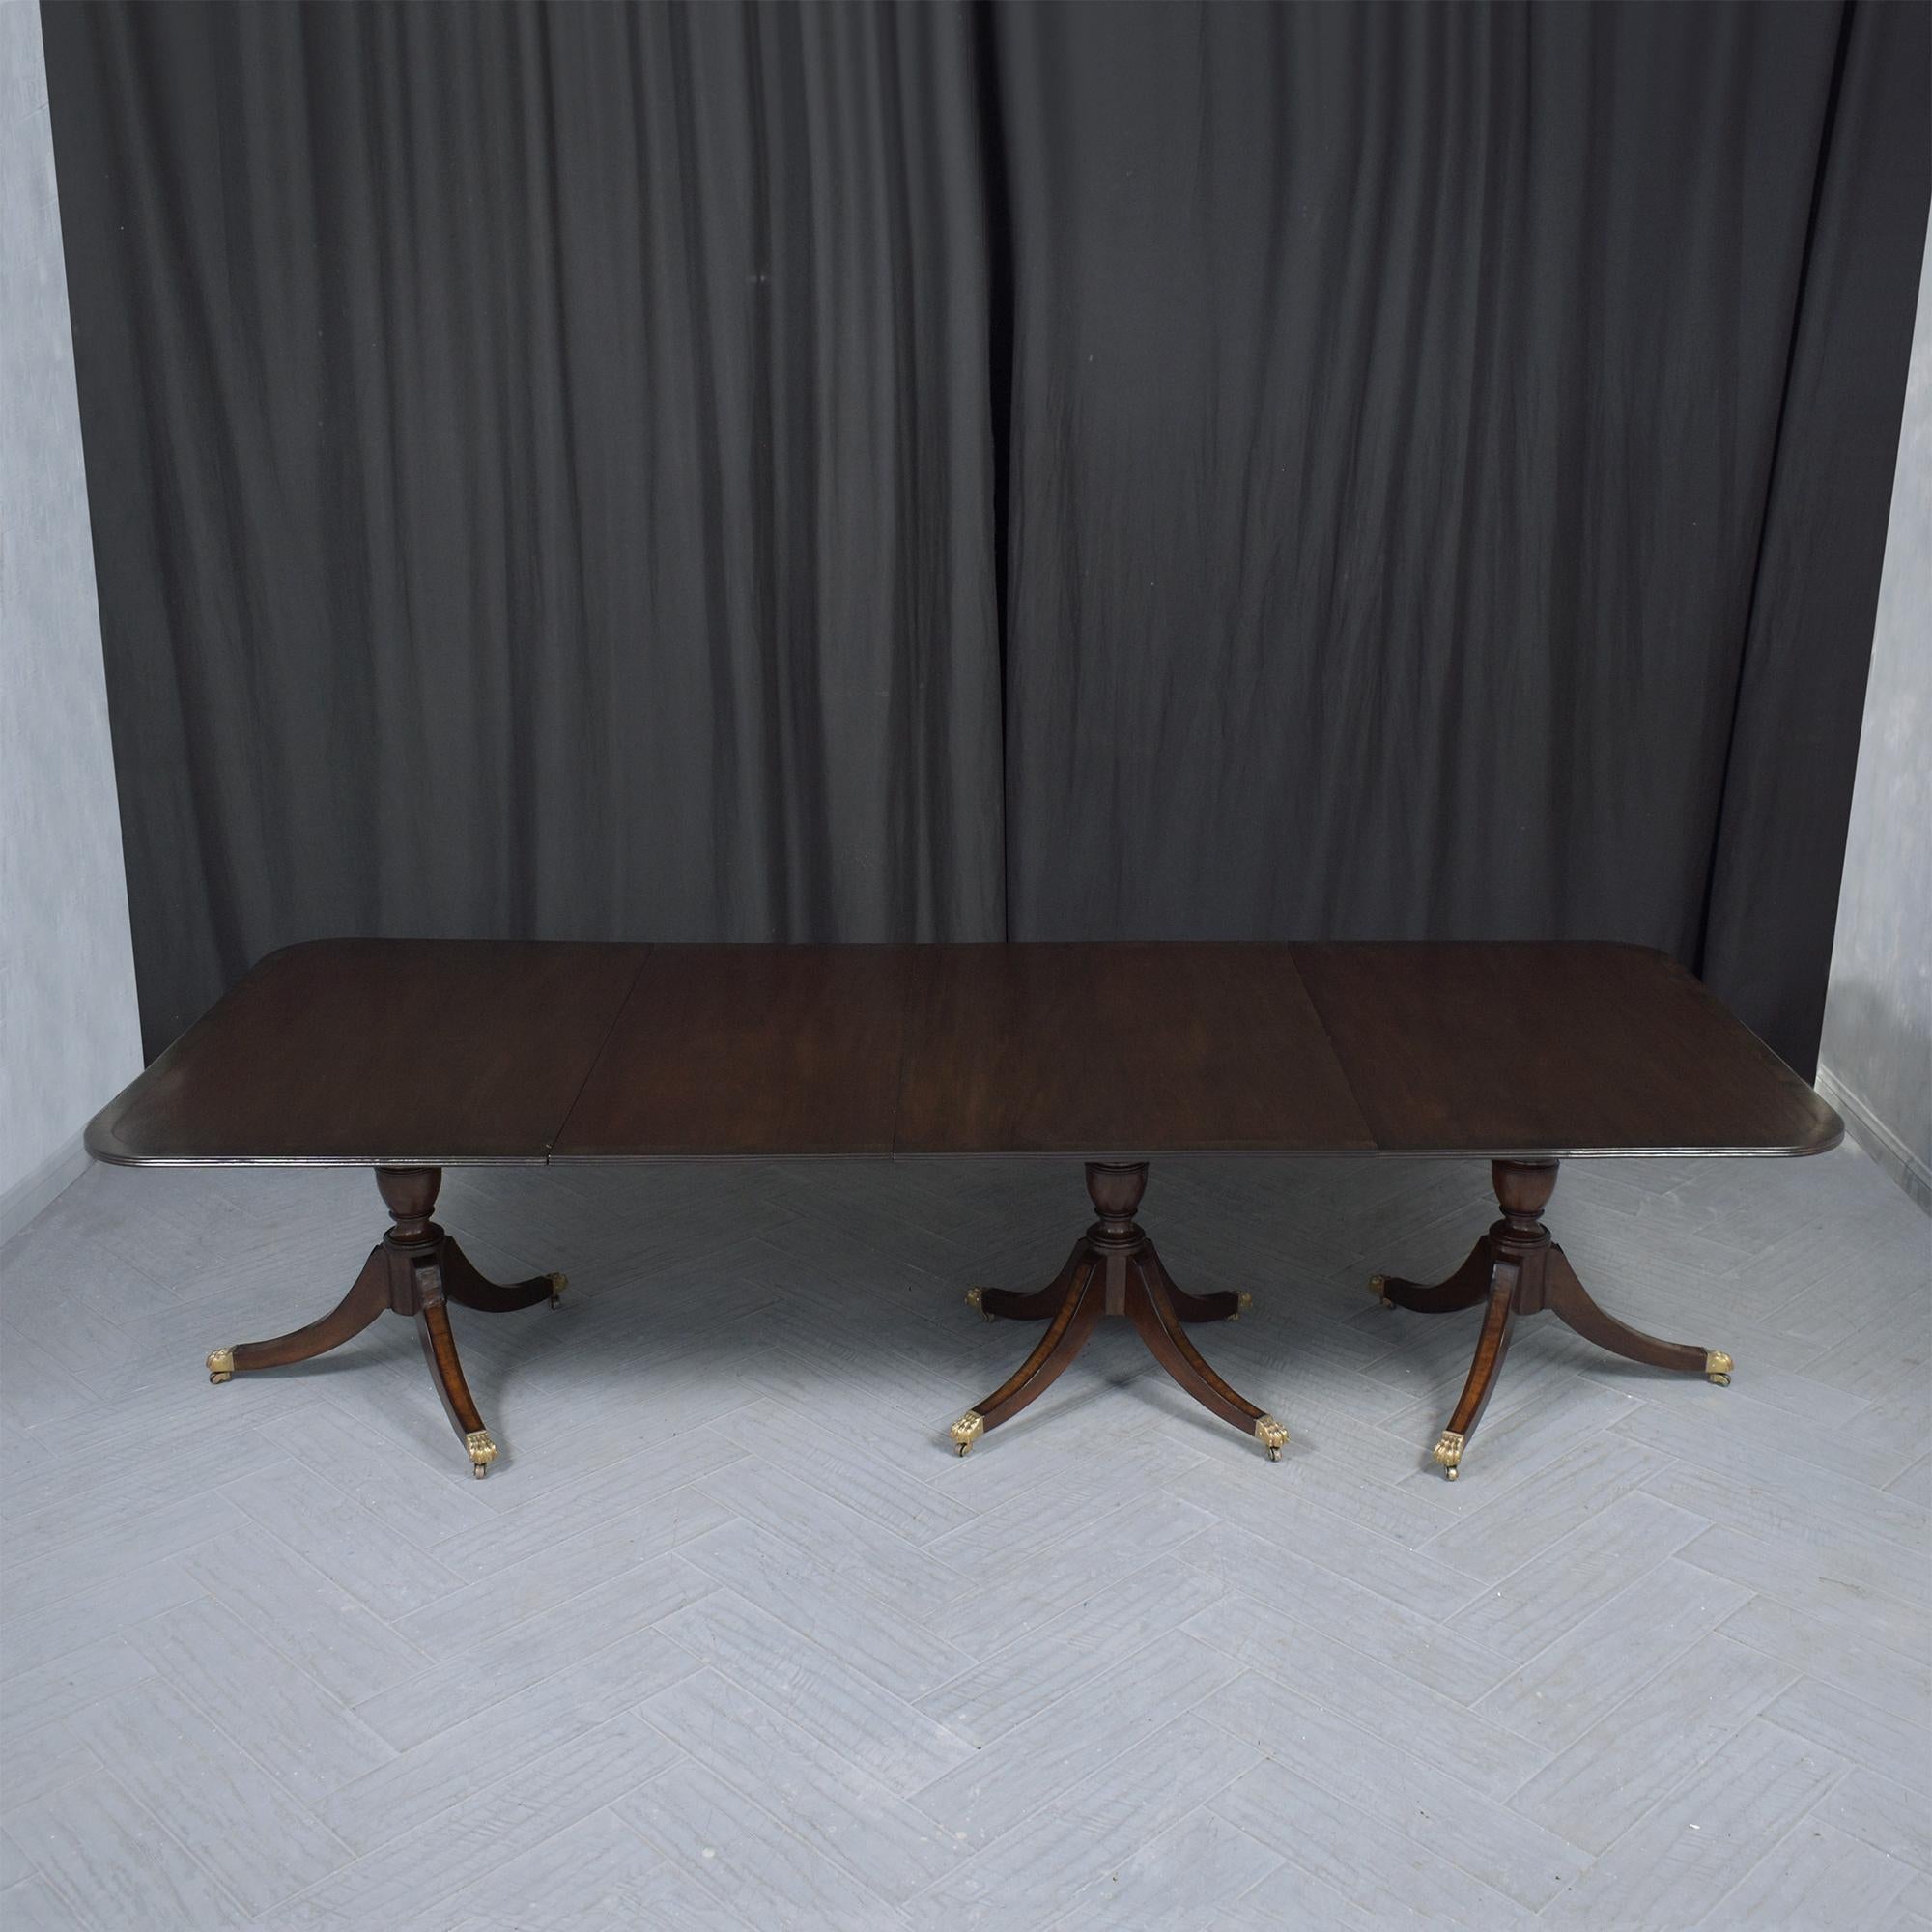 Restored 1890s George III Mahogany Dining Table with Extendable Leaves In Good Condition For Sale In Los Angeles, CA